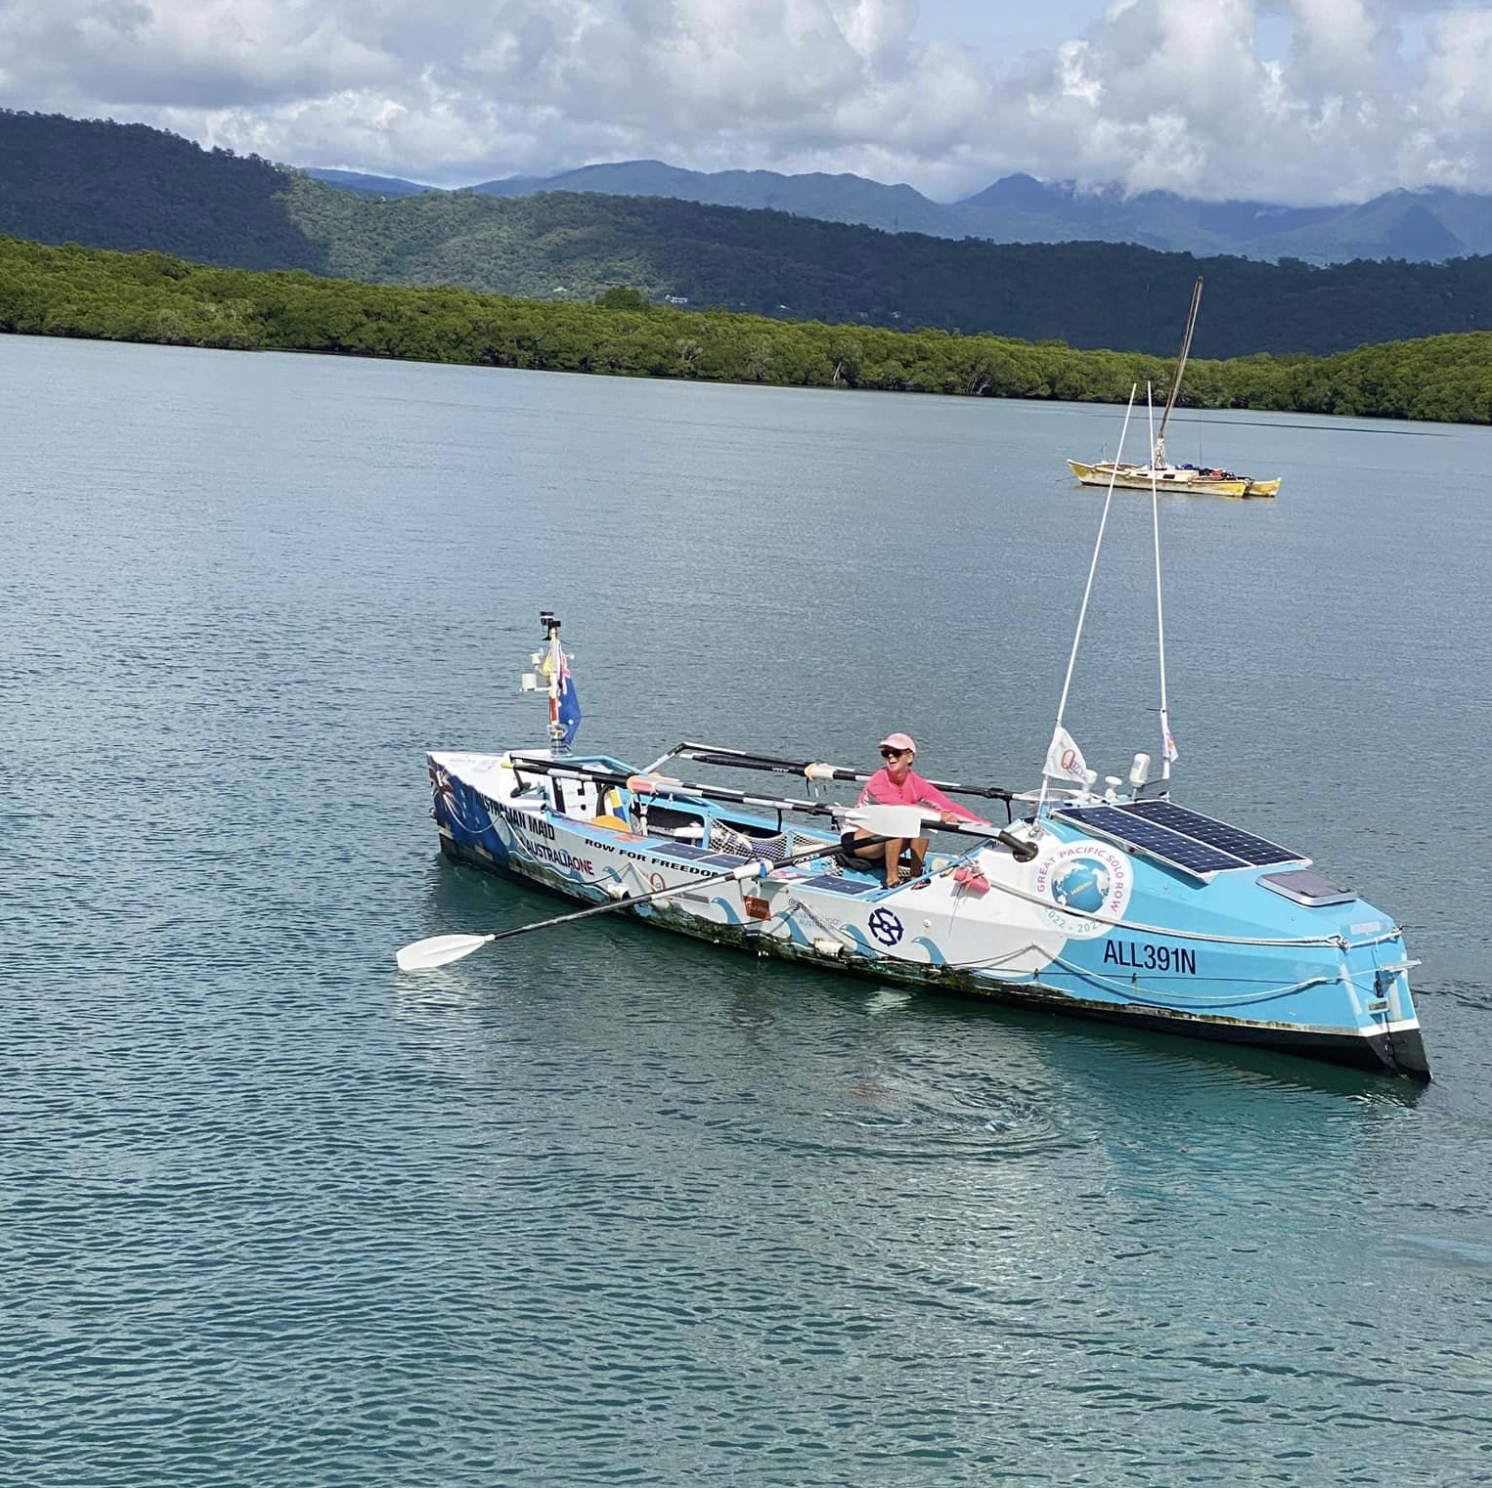 Michelle arriving in Cairns after rowing across the Pacific